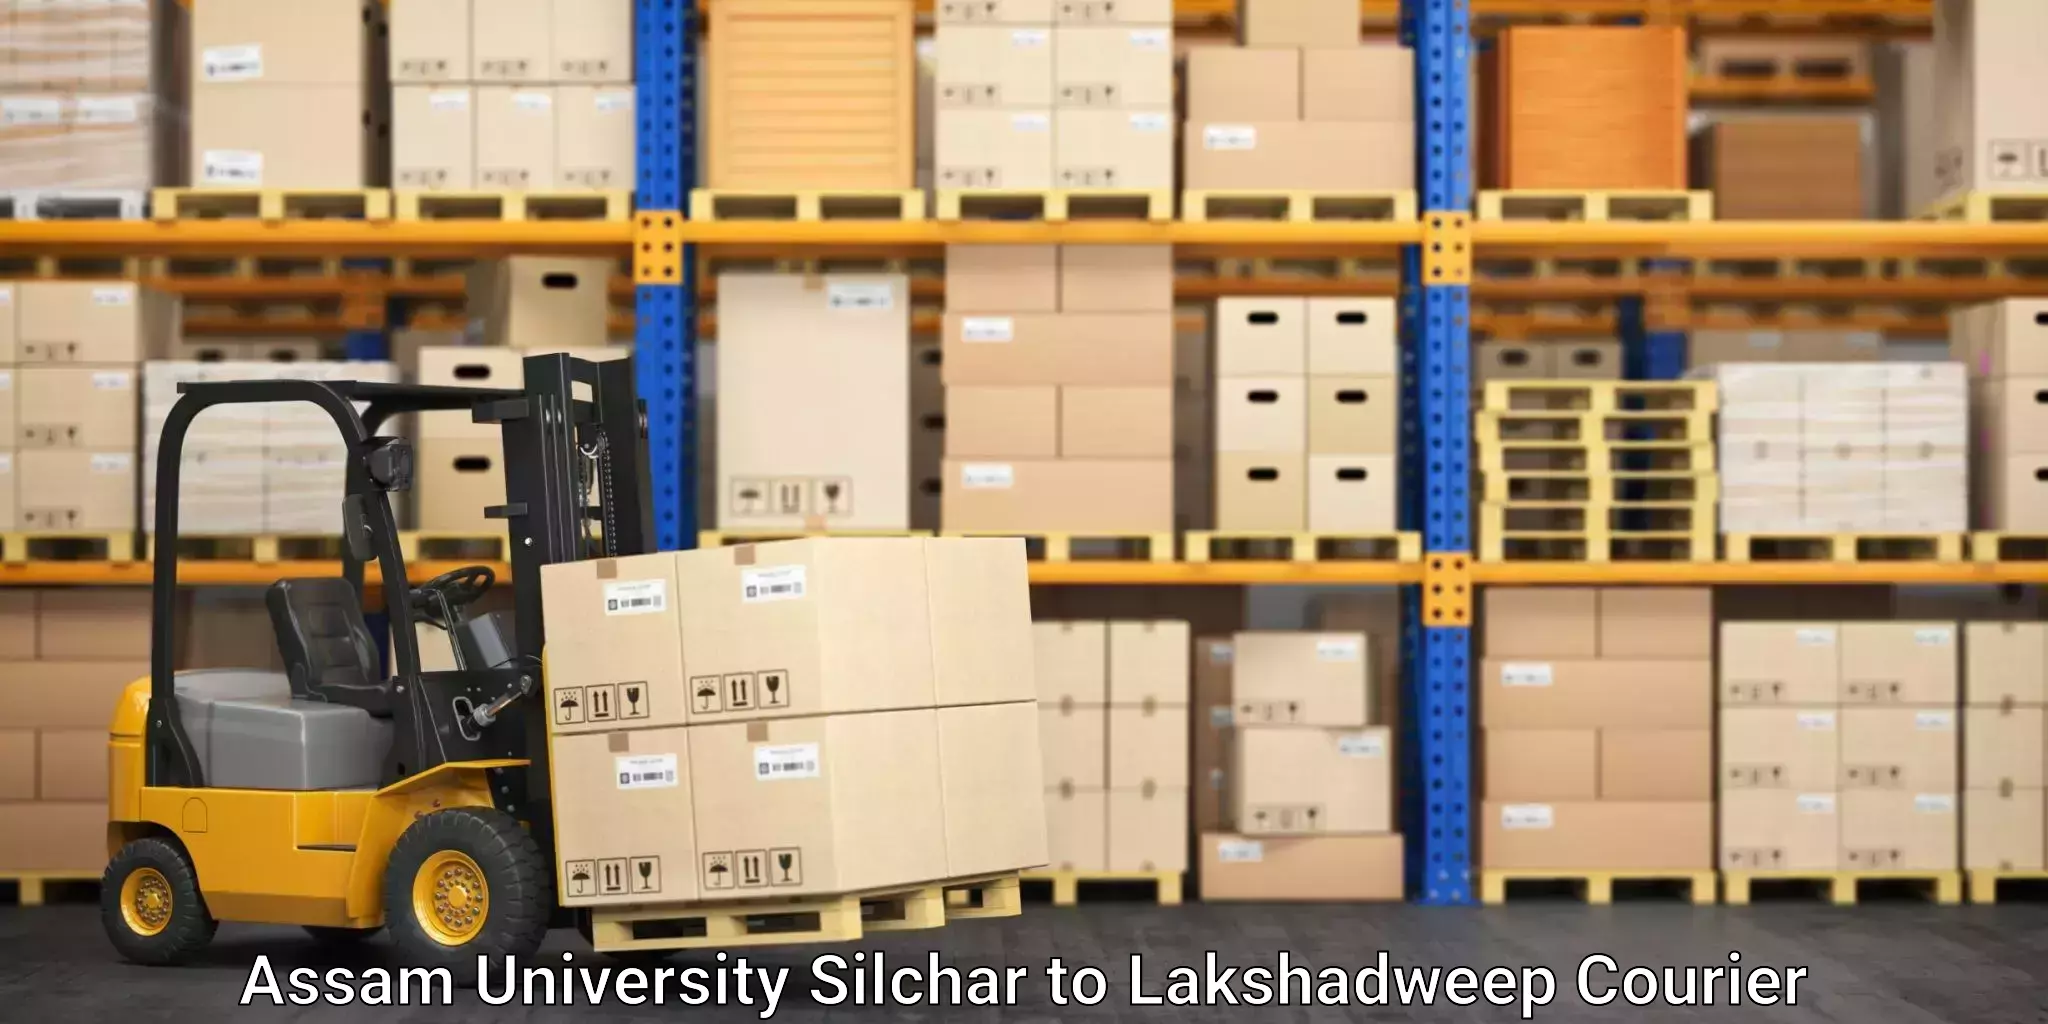 Efficient shipping operations in Assam University Silchar to Lakshadweep